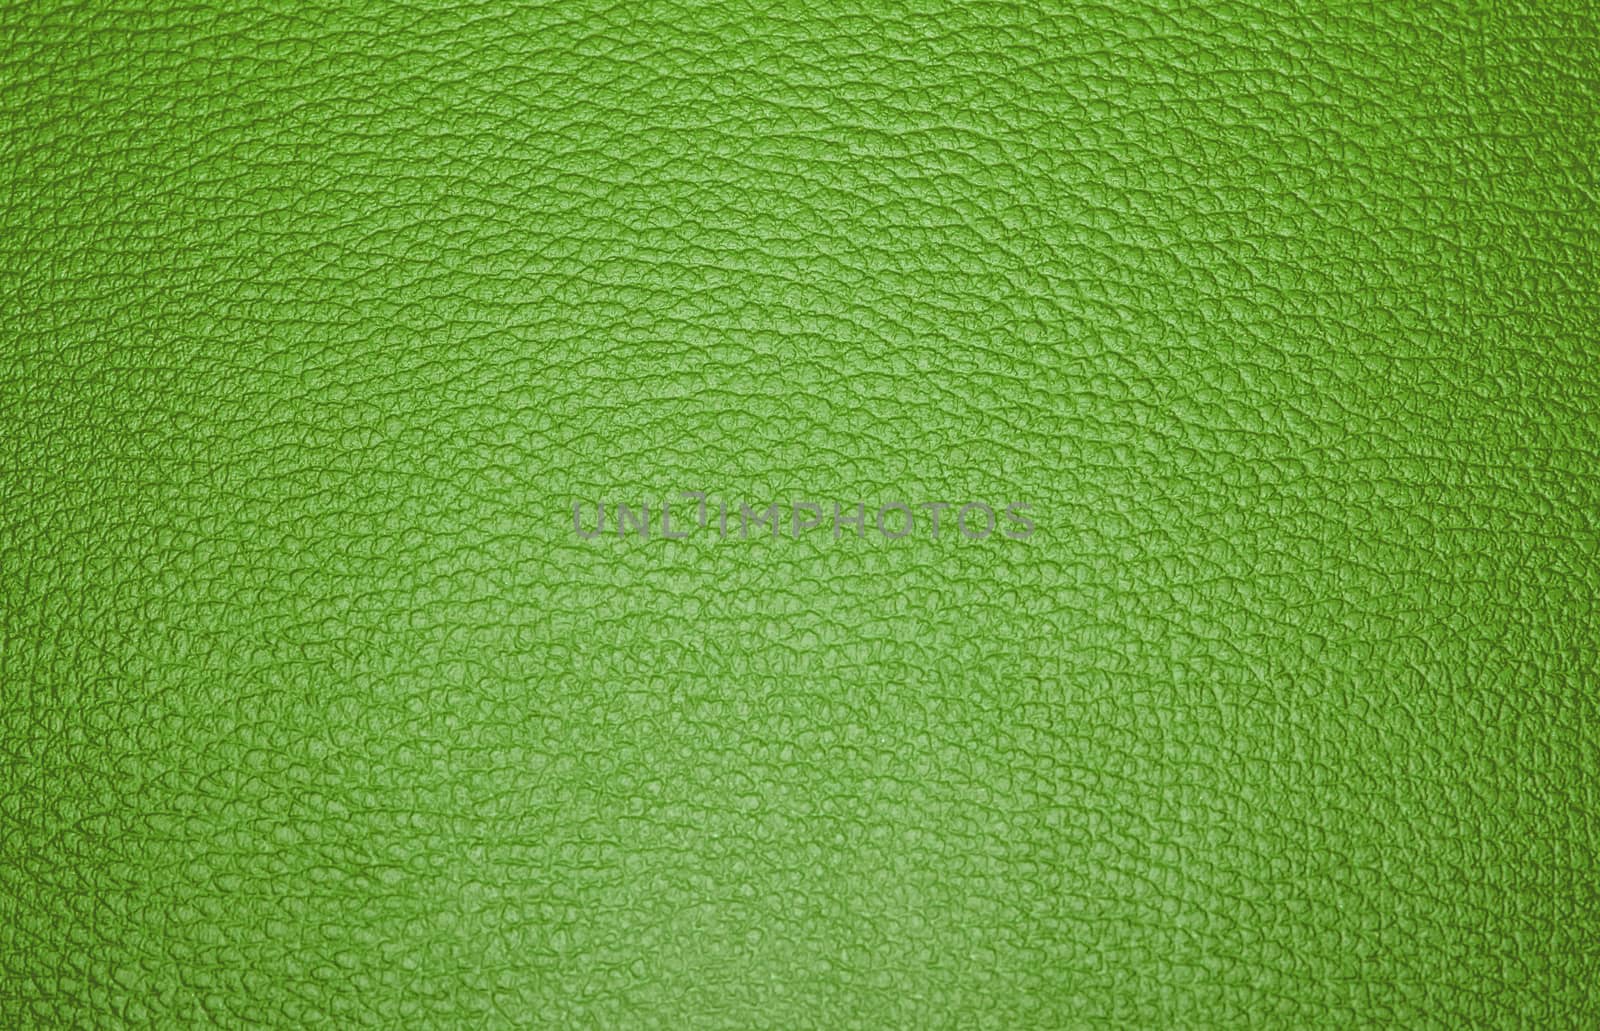 Texture colored leatherette brown, for design and upholstery for decoration and fashion, for the background and tukstur